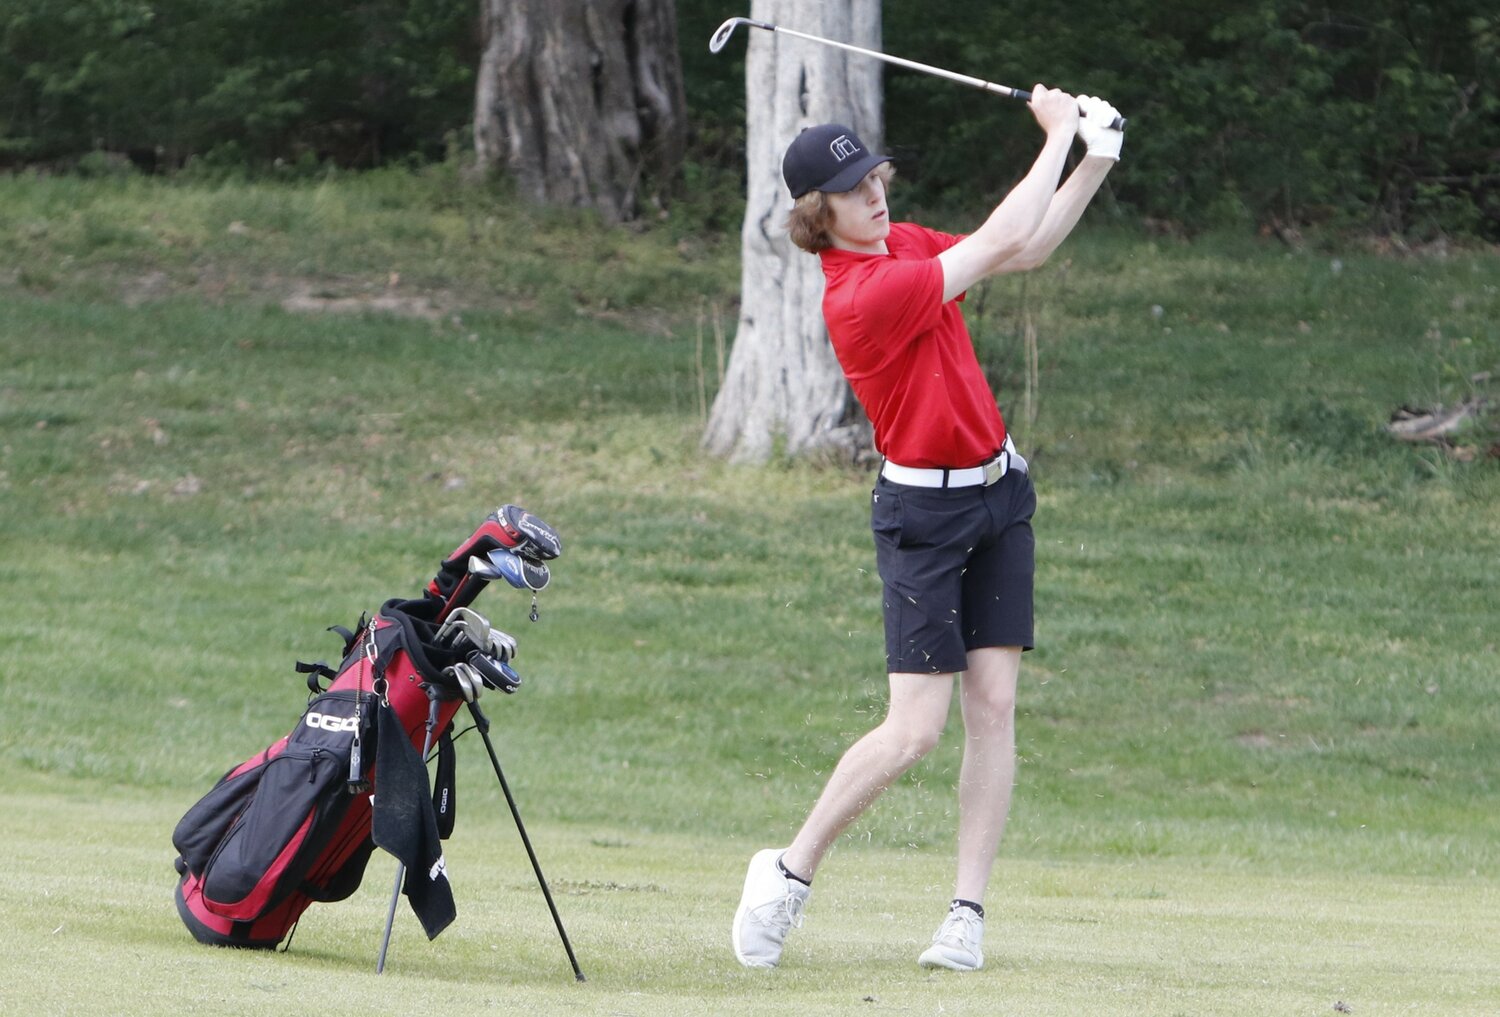 Warrenton junior Troy Anderson follows through after hitting a shot in a dual match against St. Charles West in April. Anderson earned GAC North first team honors.